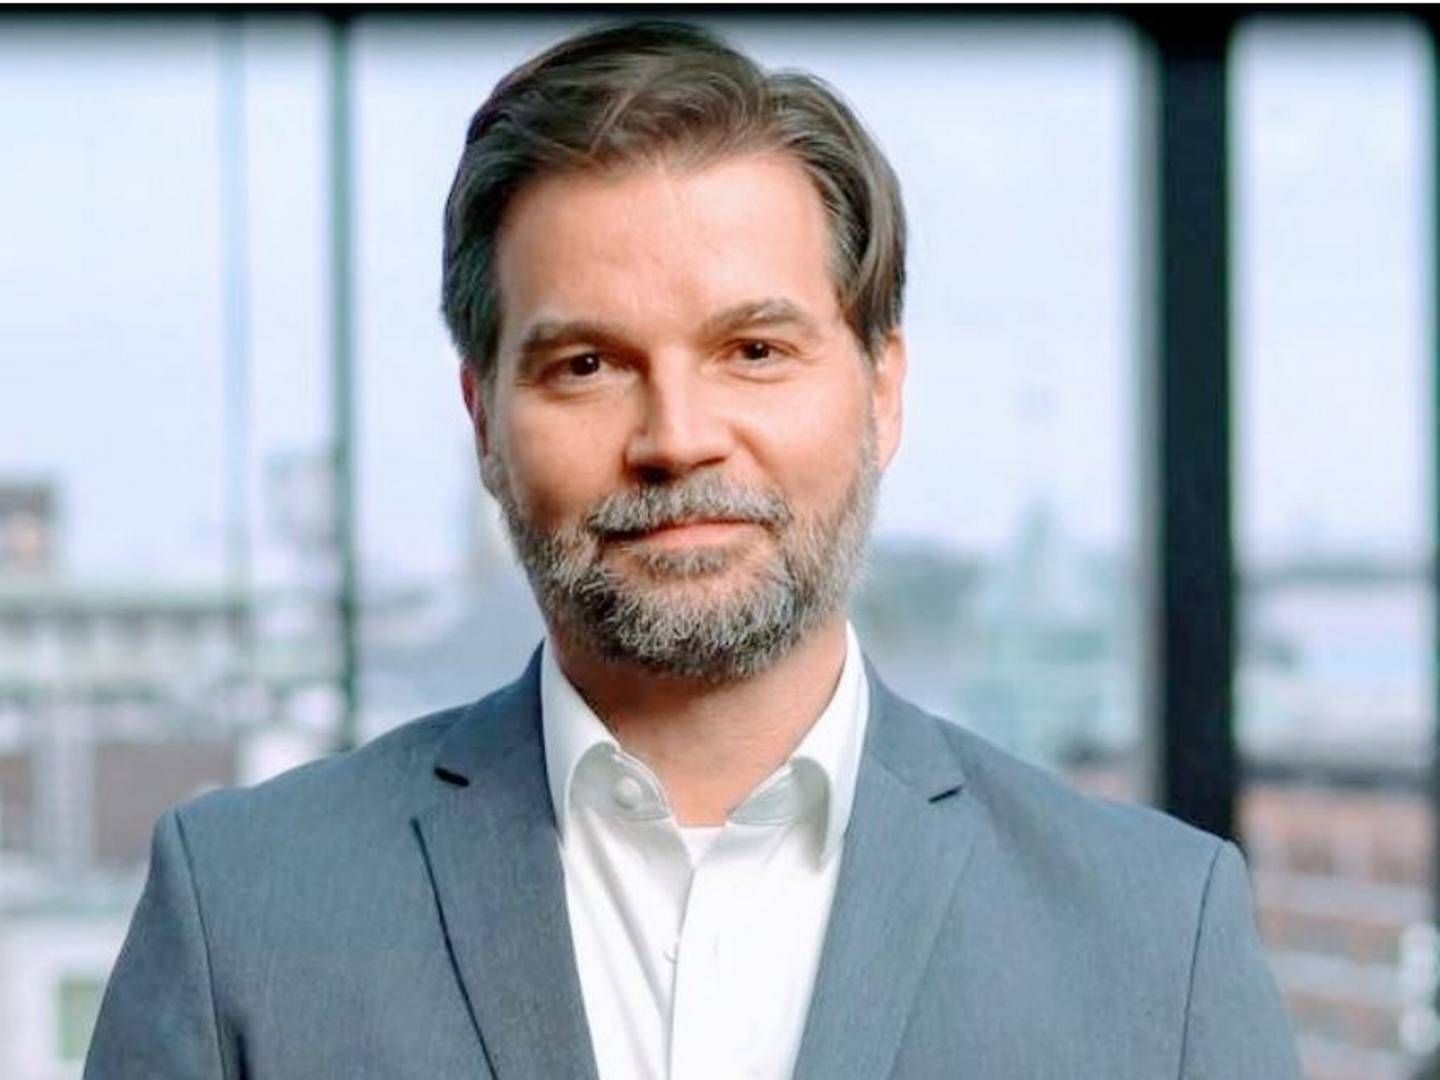 Ralf Belusa will leave Hapag-Lloyd at the end of May after seven years as managing director - digital business & transformation. | Photo: Hapag-Lloyd